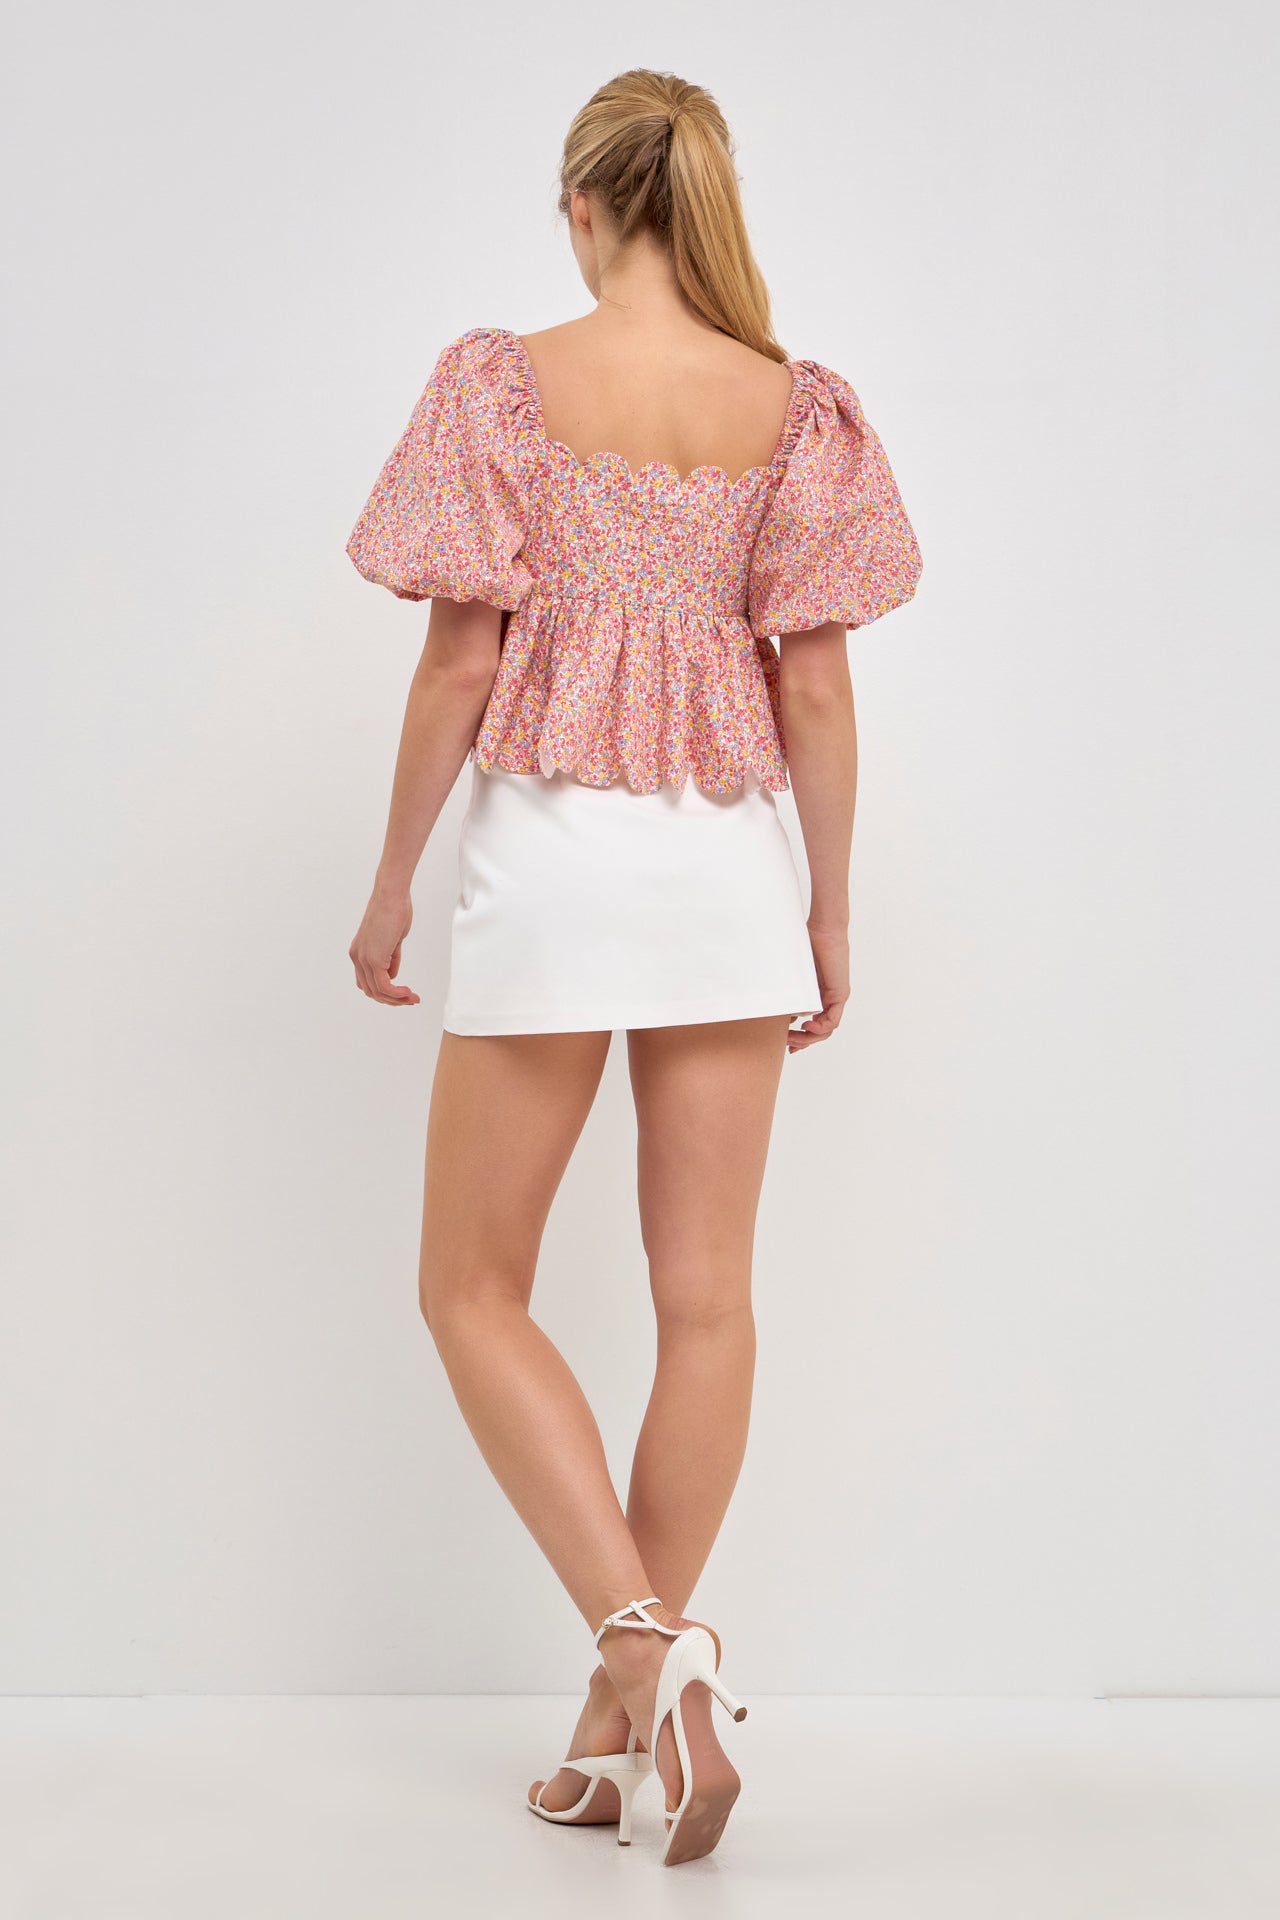 FREE THE ROSES - Scalloped Detail Top - TOPS available at Objectrare